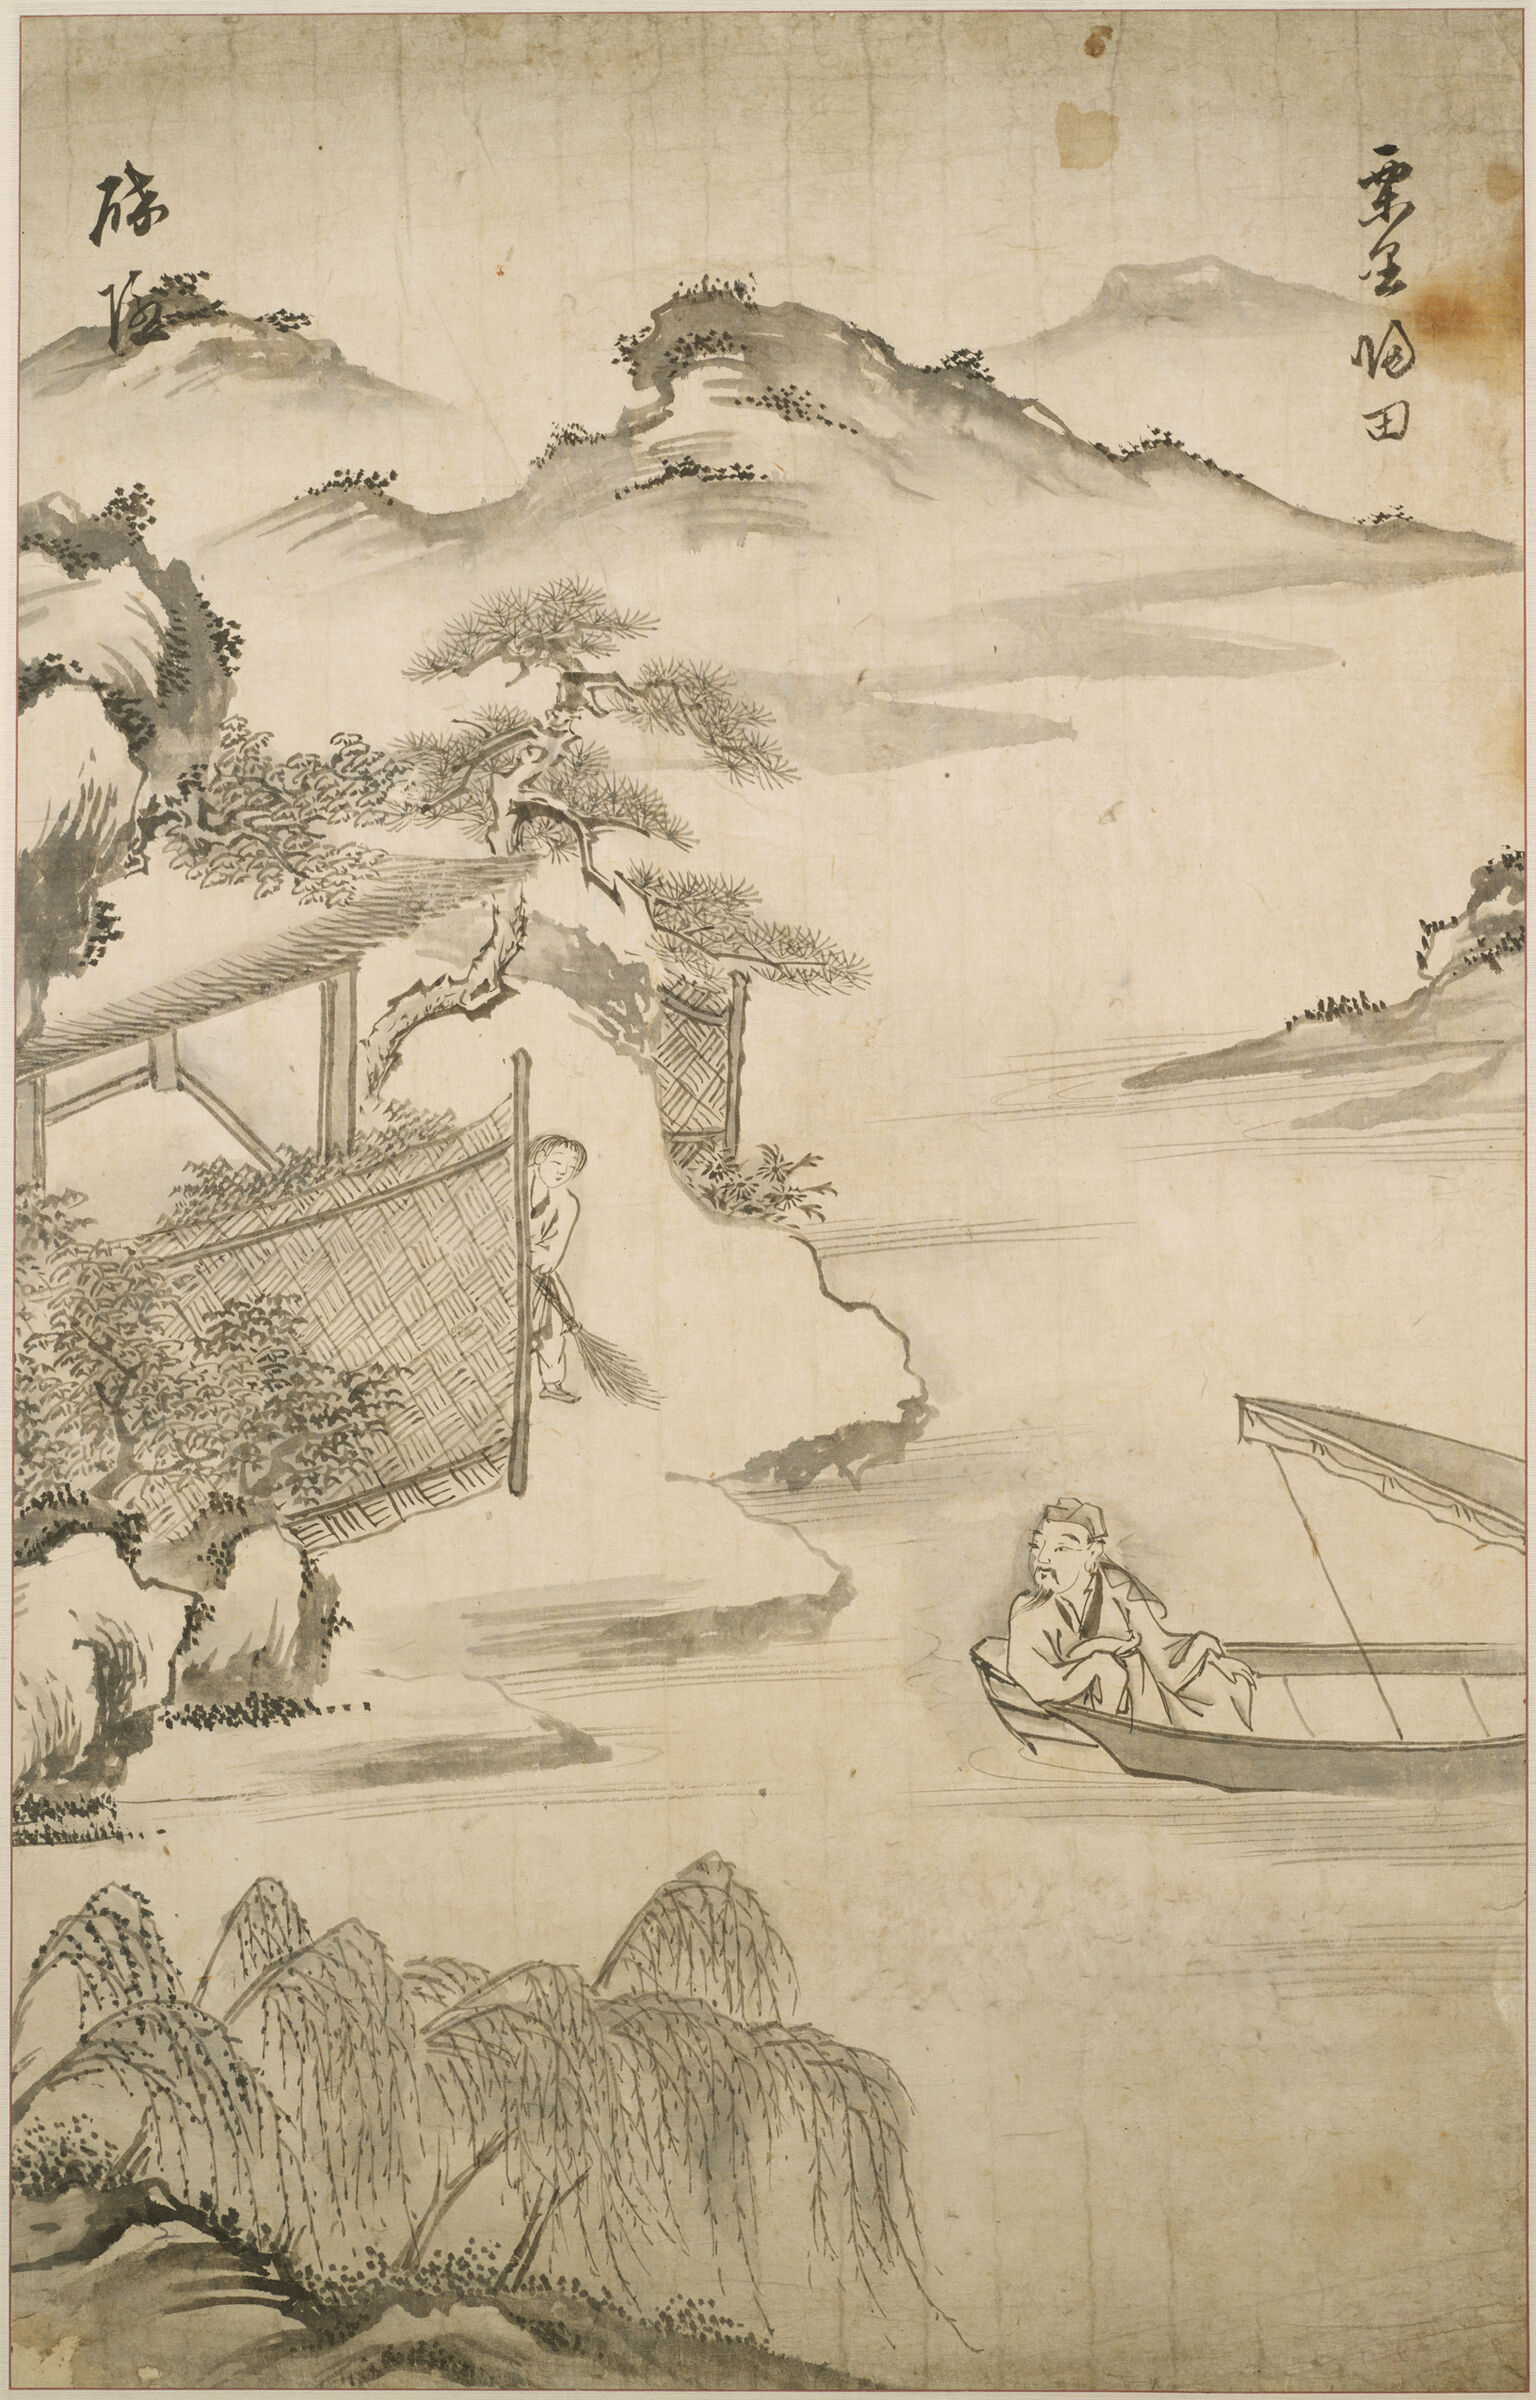 The Poet Tao Yuanming (365-427) Returning To His Farm At Lili